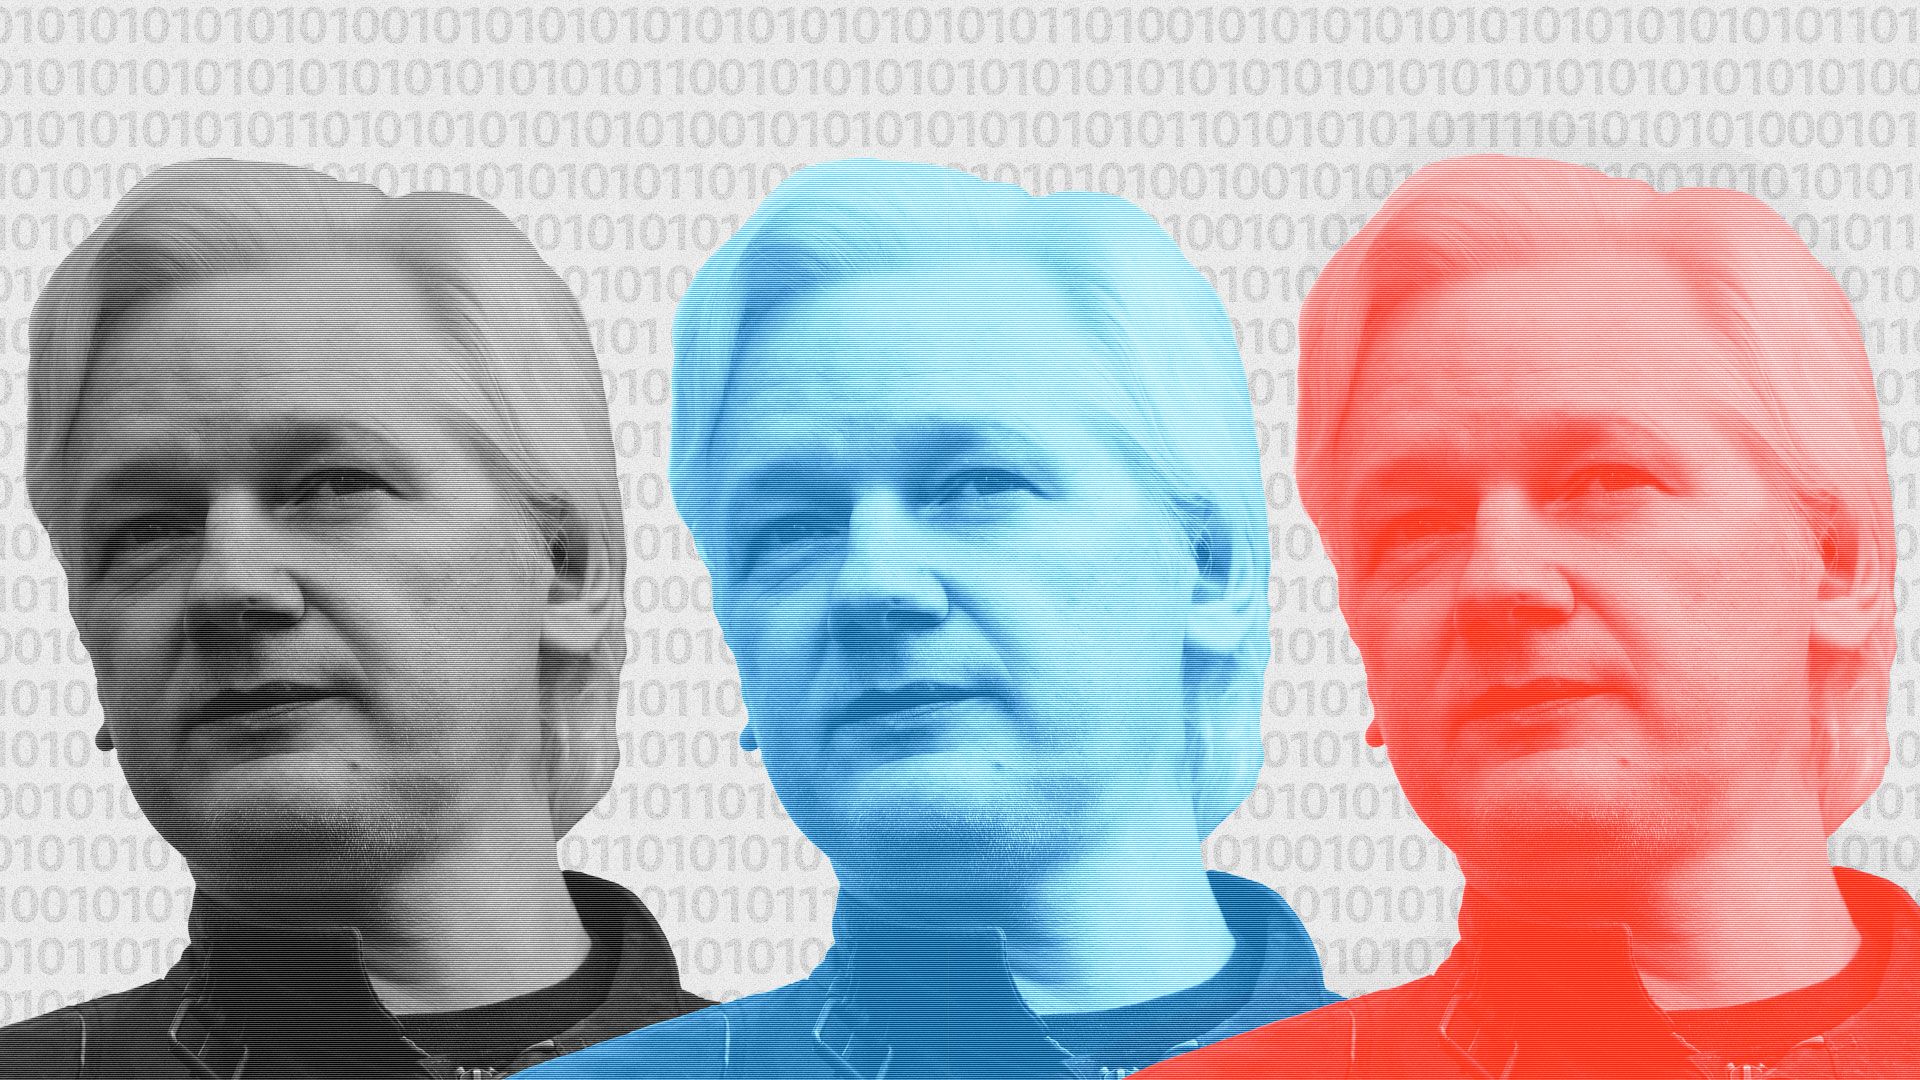 Three different colored images of Julian Assange's head